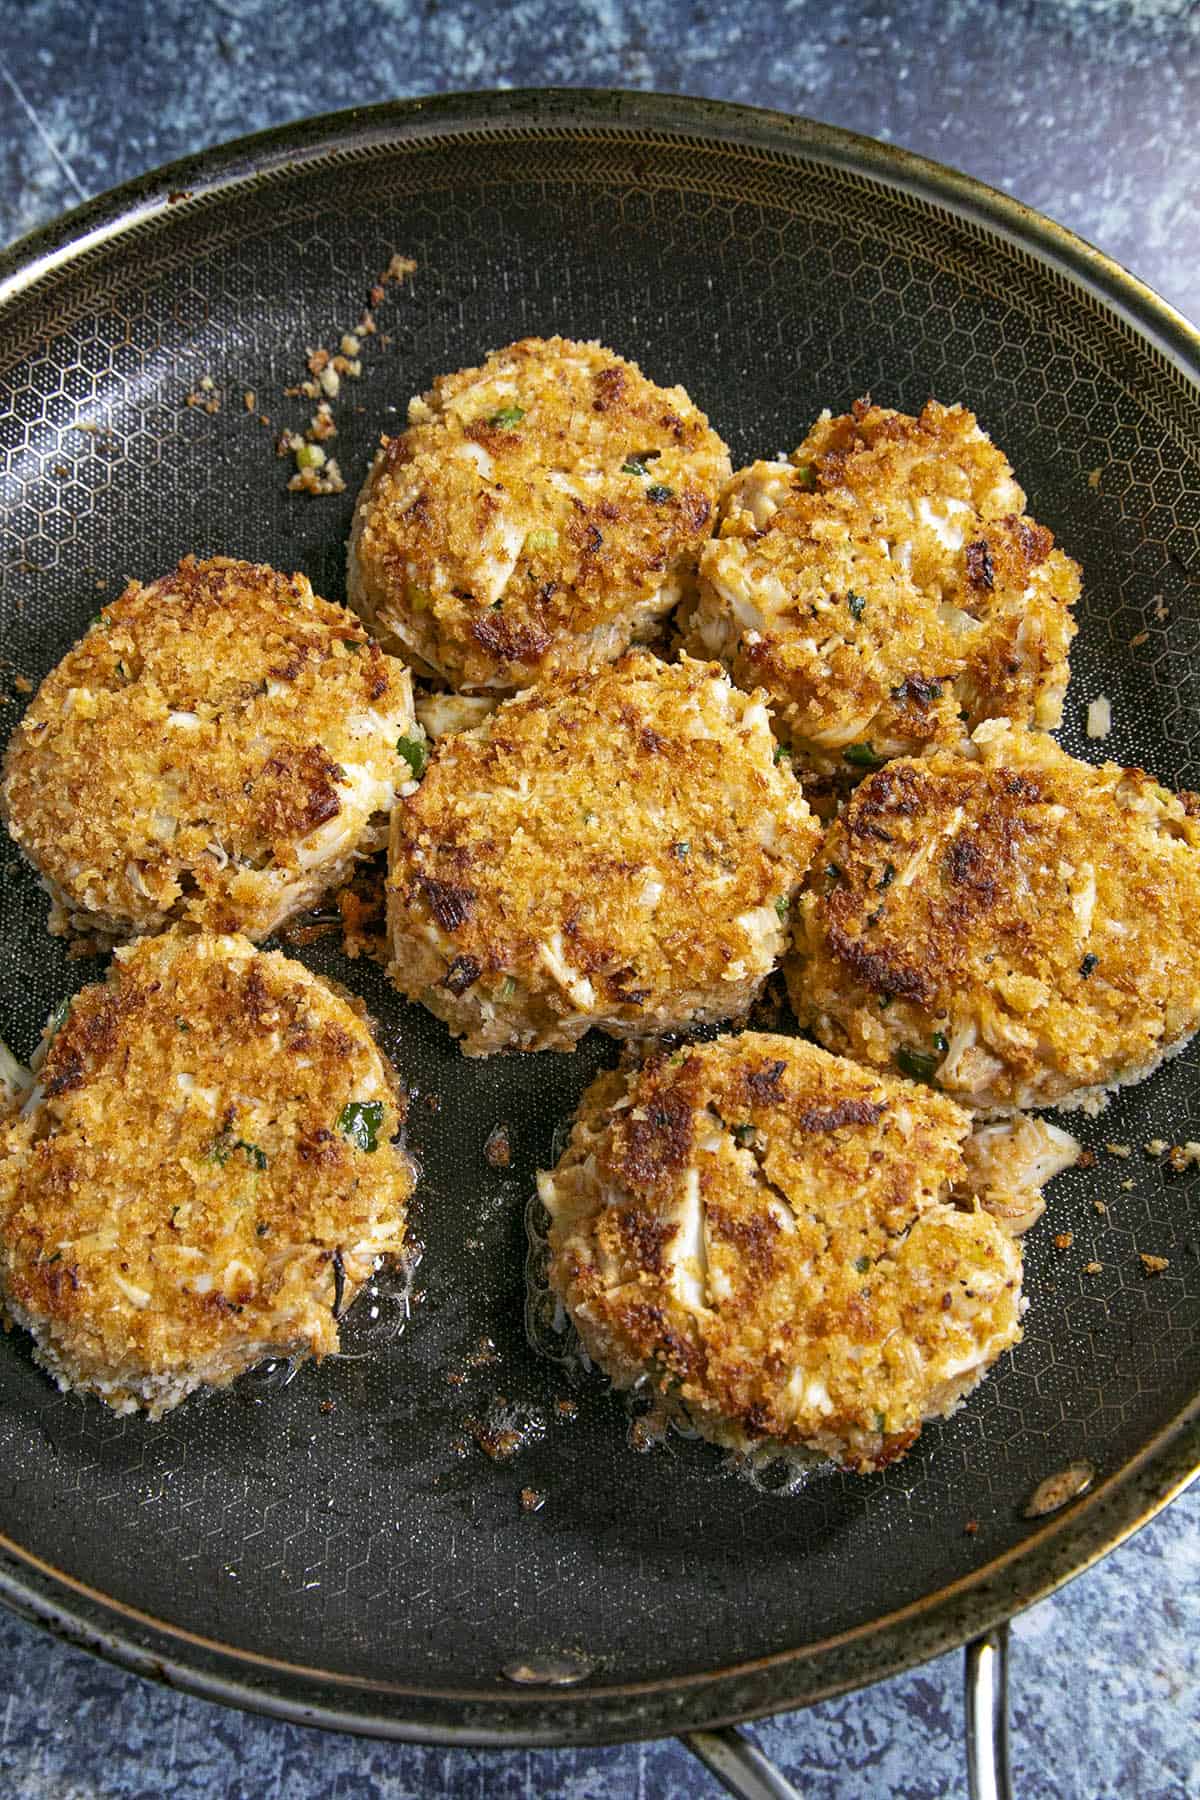 Cooking crab cakes in a hot pan